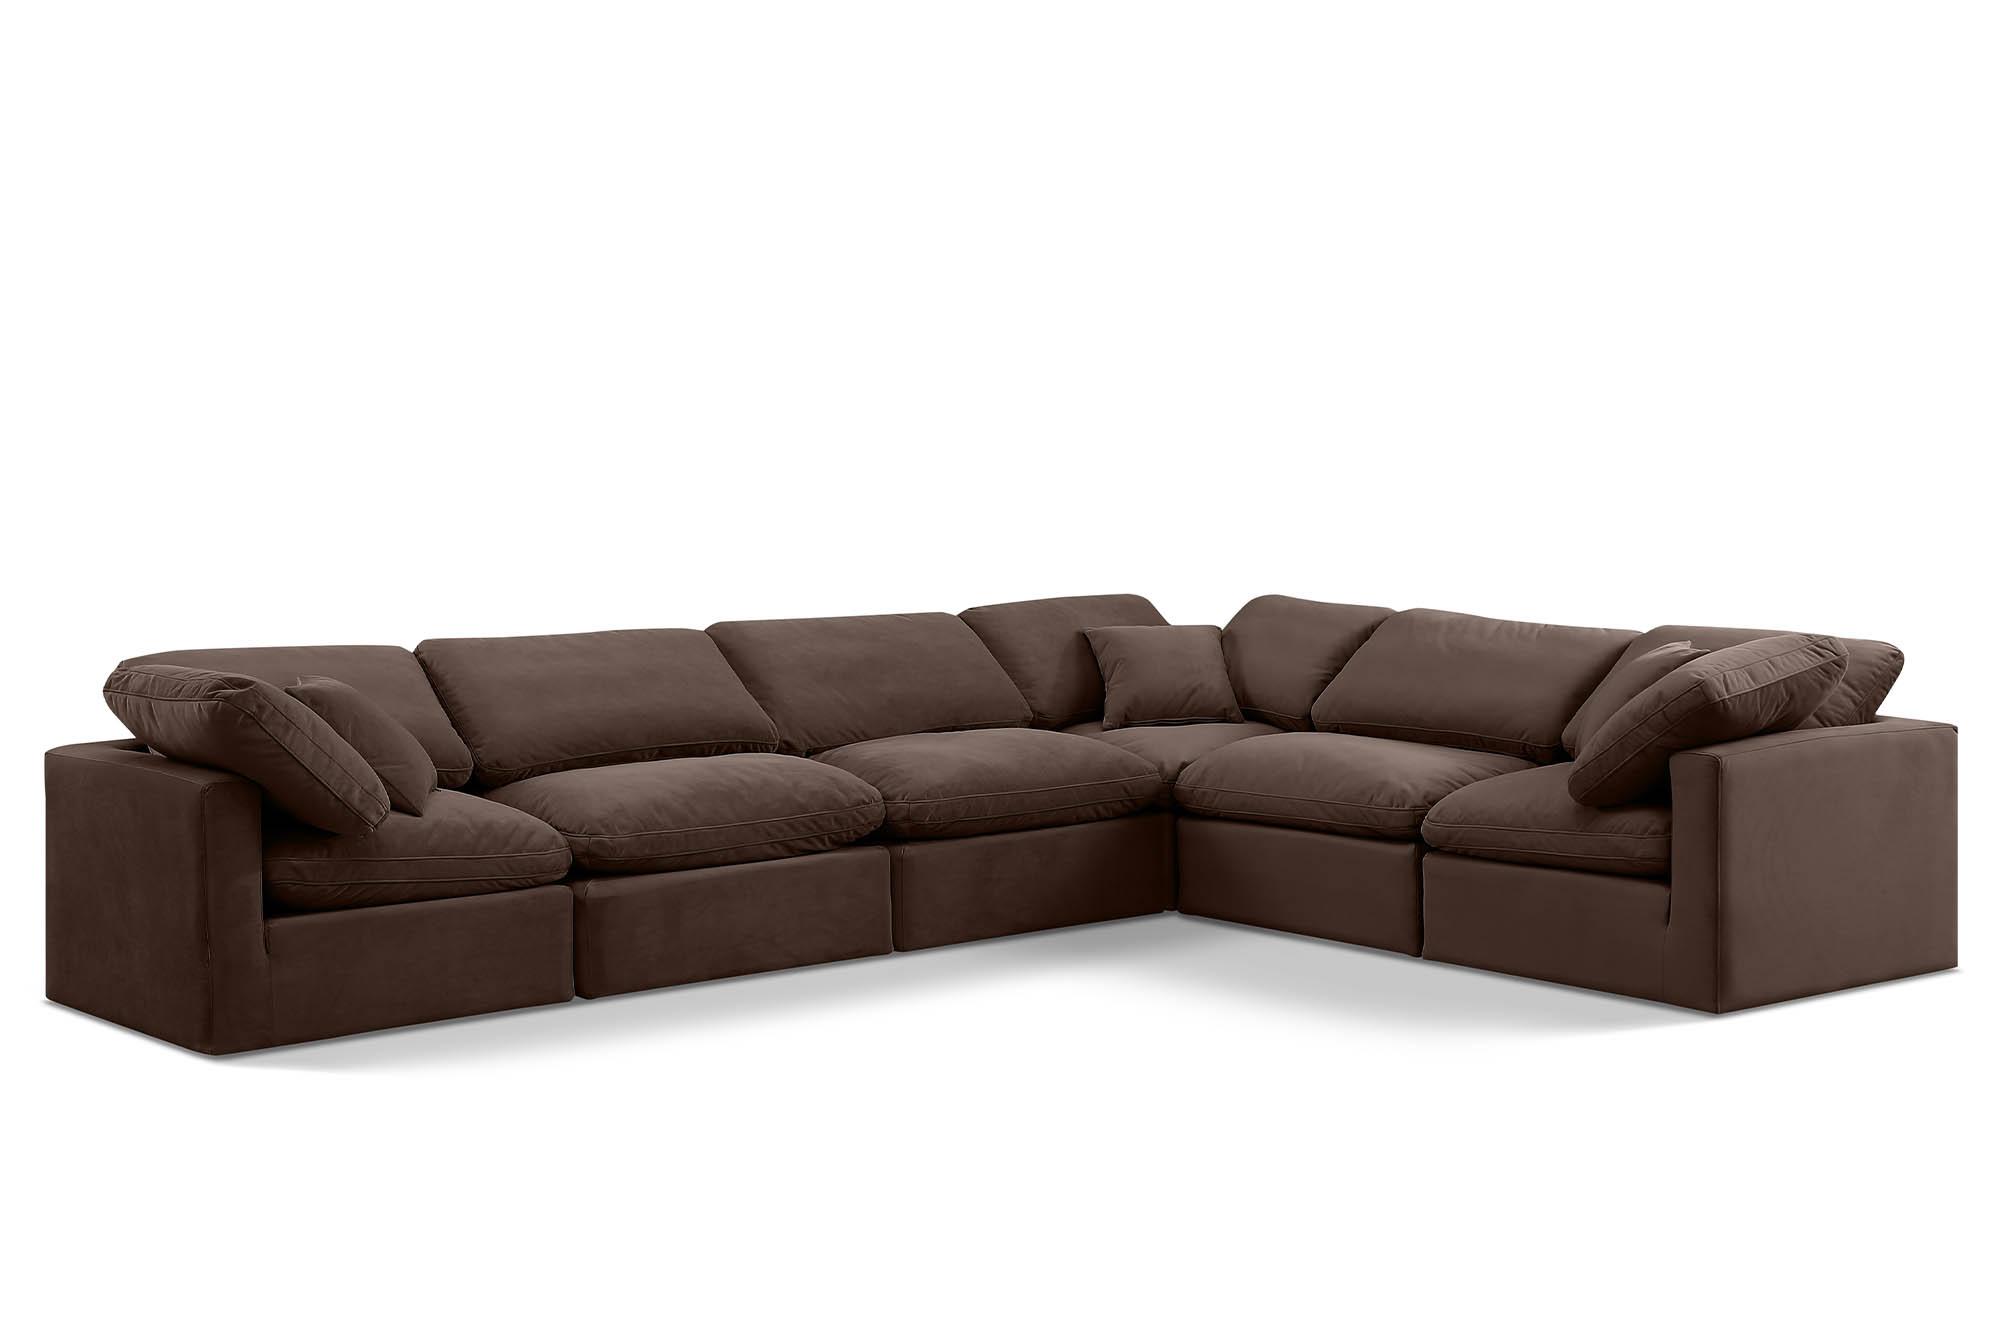 Contemporary, Modern Modular Sectional Sofa INDULGE 147Brown-Sec6A 147Brown-Sec6A in Brown Velvet